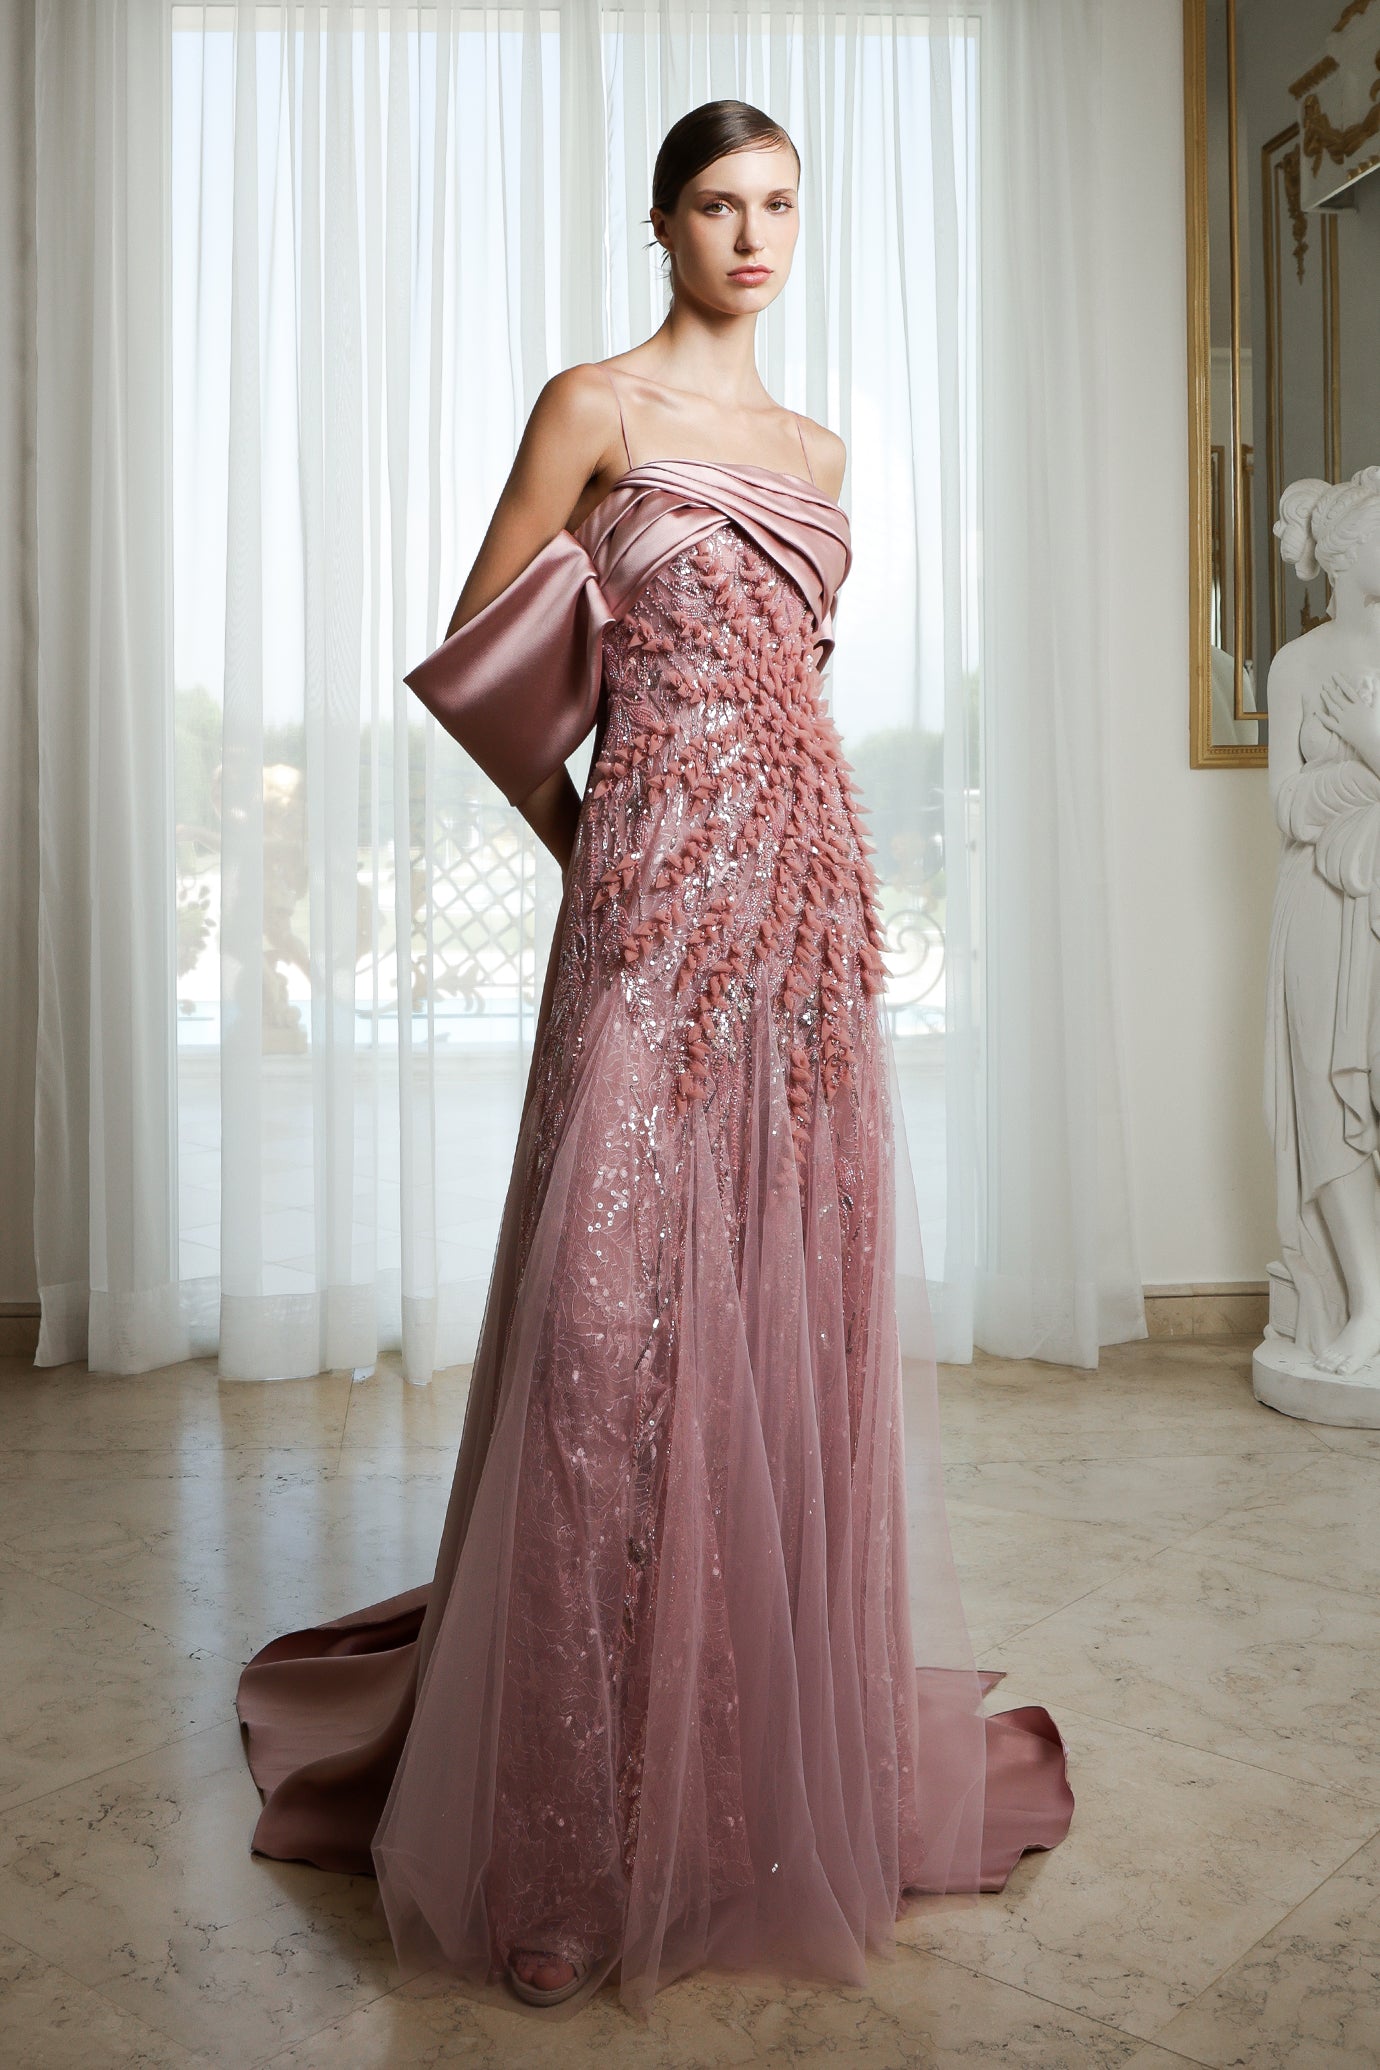 Rose Blossom Gown